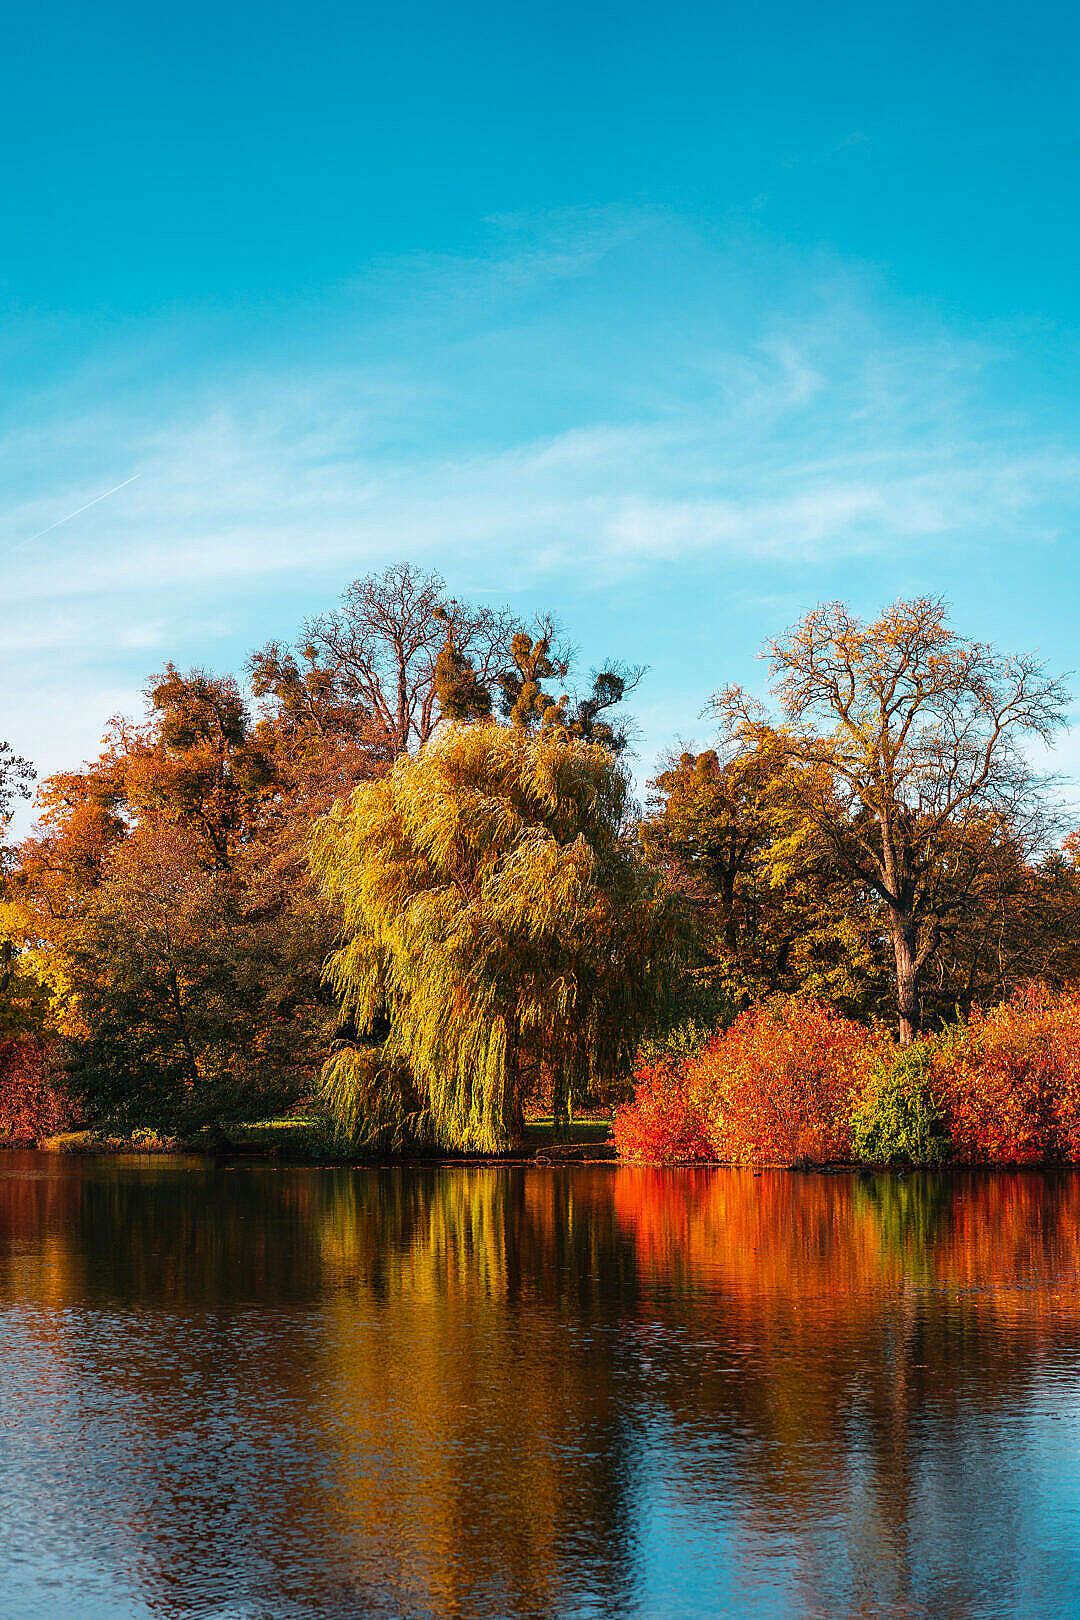 Download Autumn Colorful Trees in Fall Colors over a Lake FREE Stock Photo